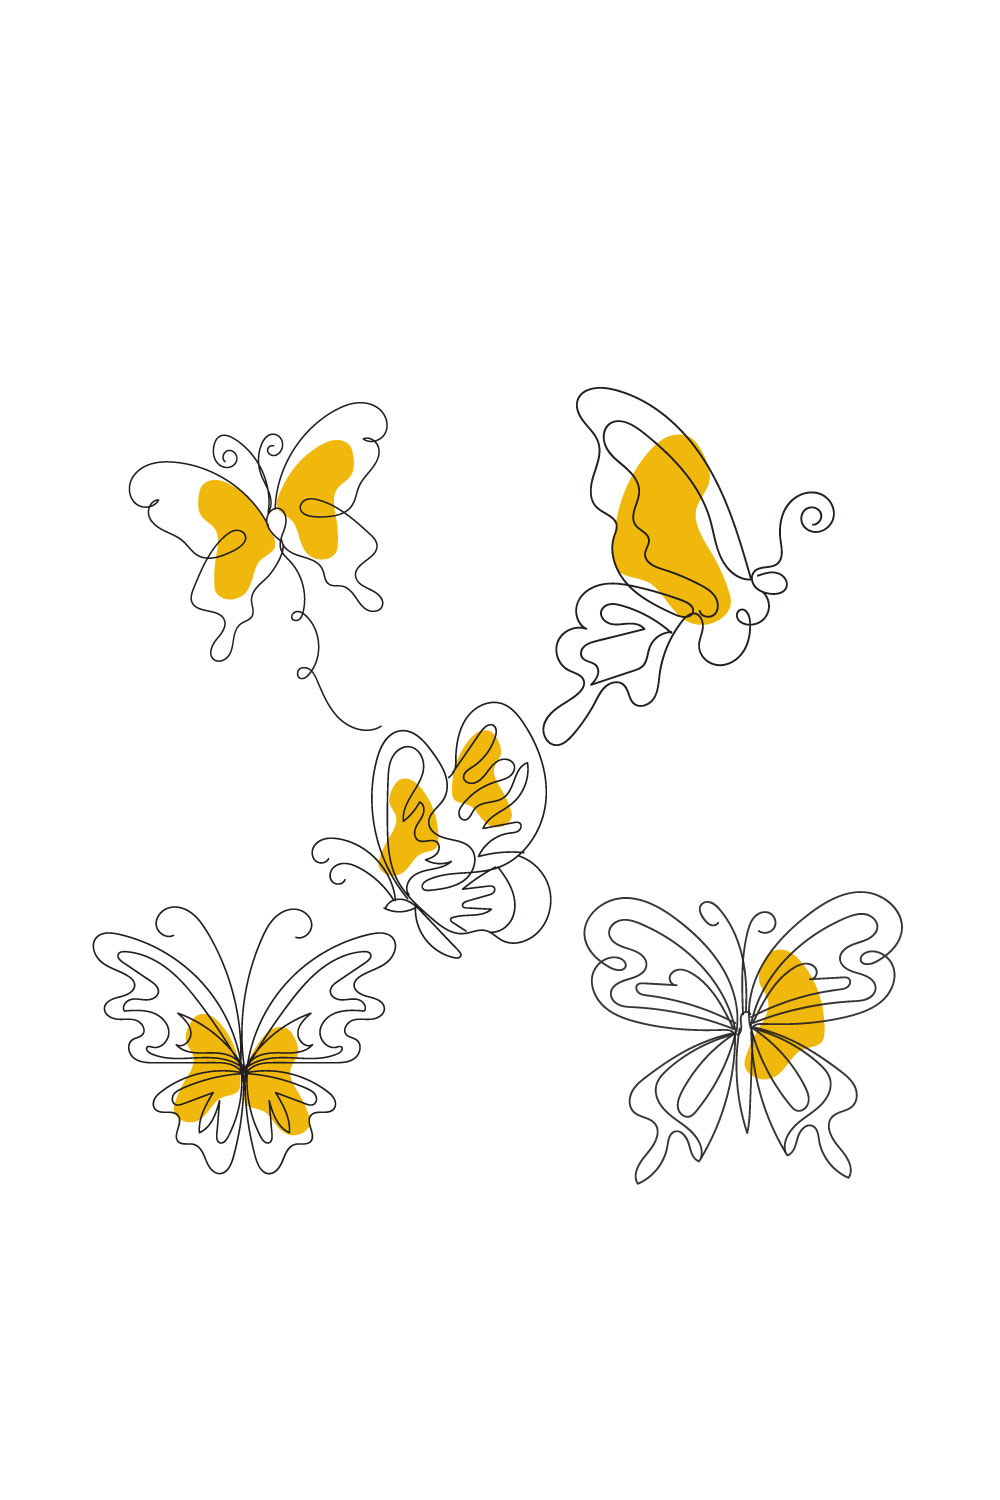 Drawing of three yellow butterflies on a white background by Sarah Morris.